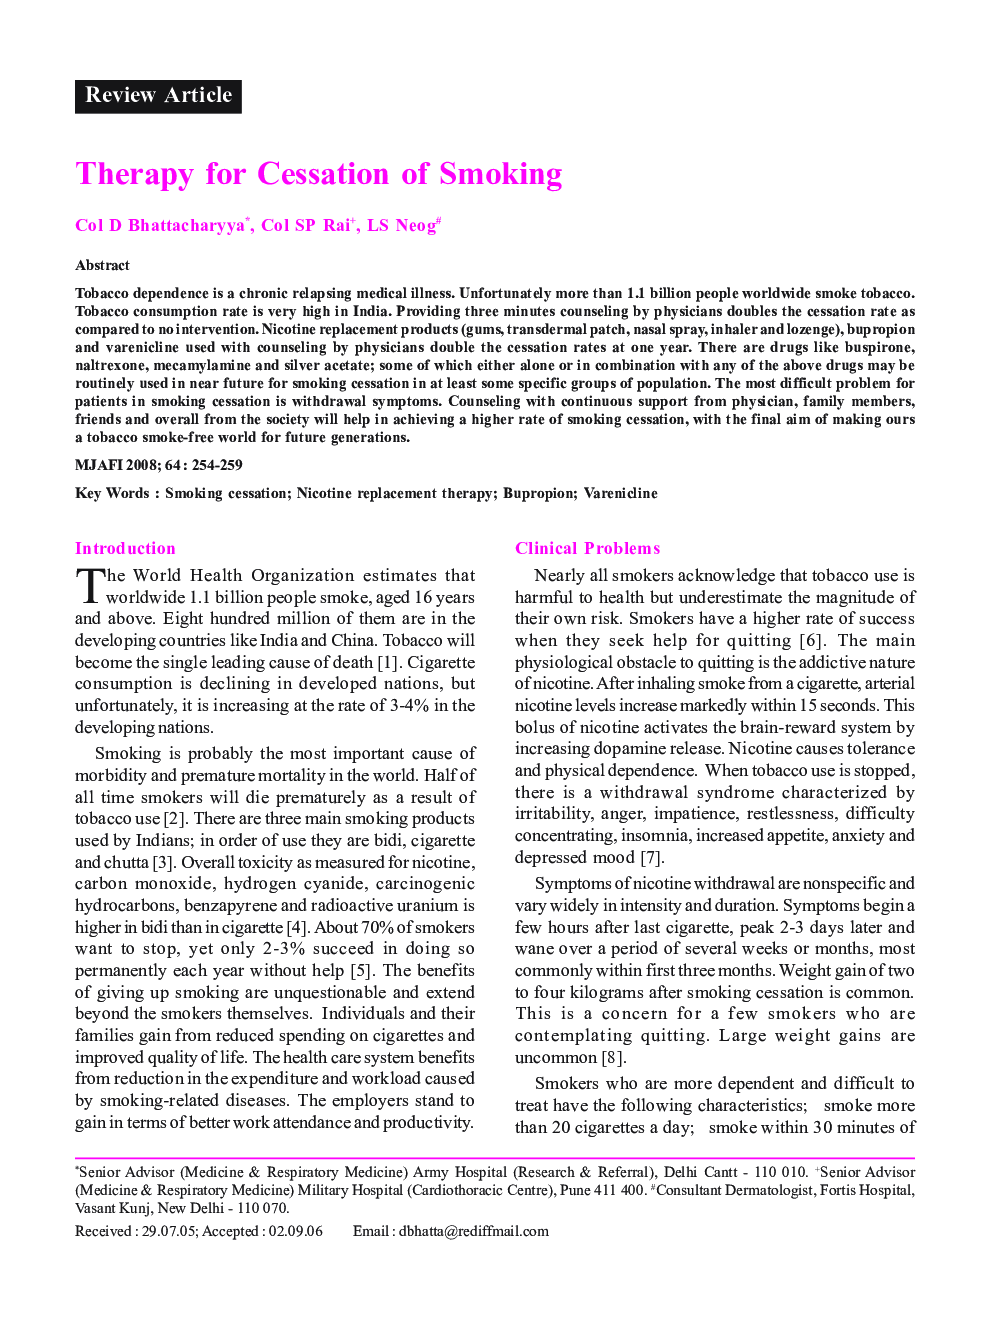 Therapy for Cessation of Smoking